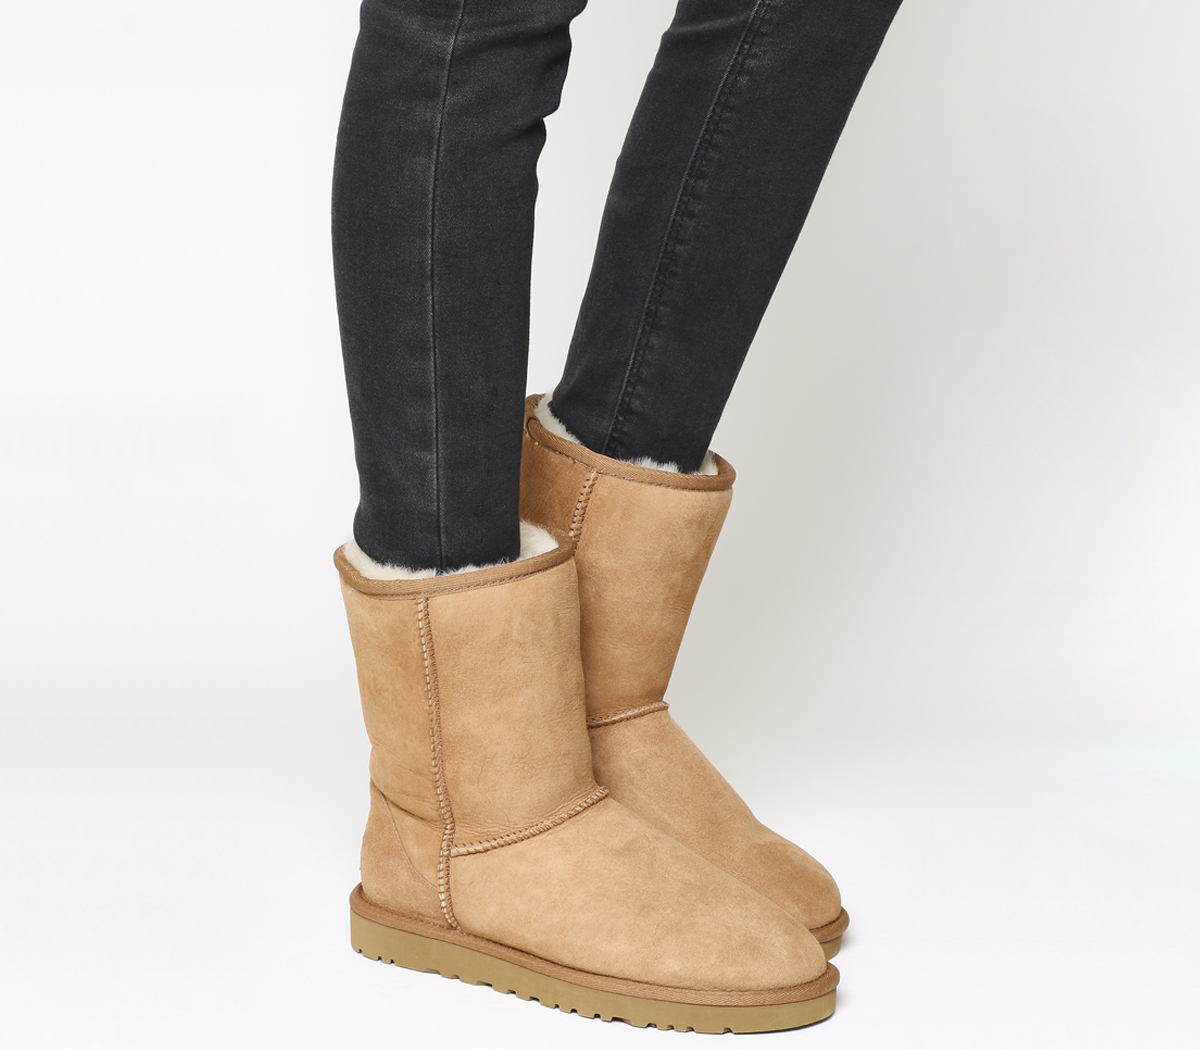 difference between ugg australia and ugg